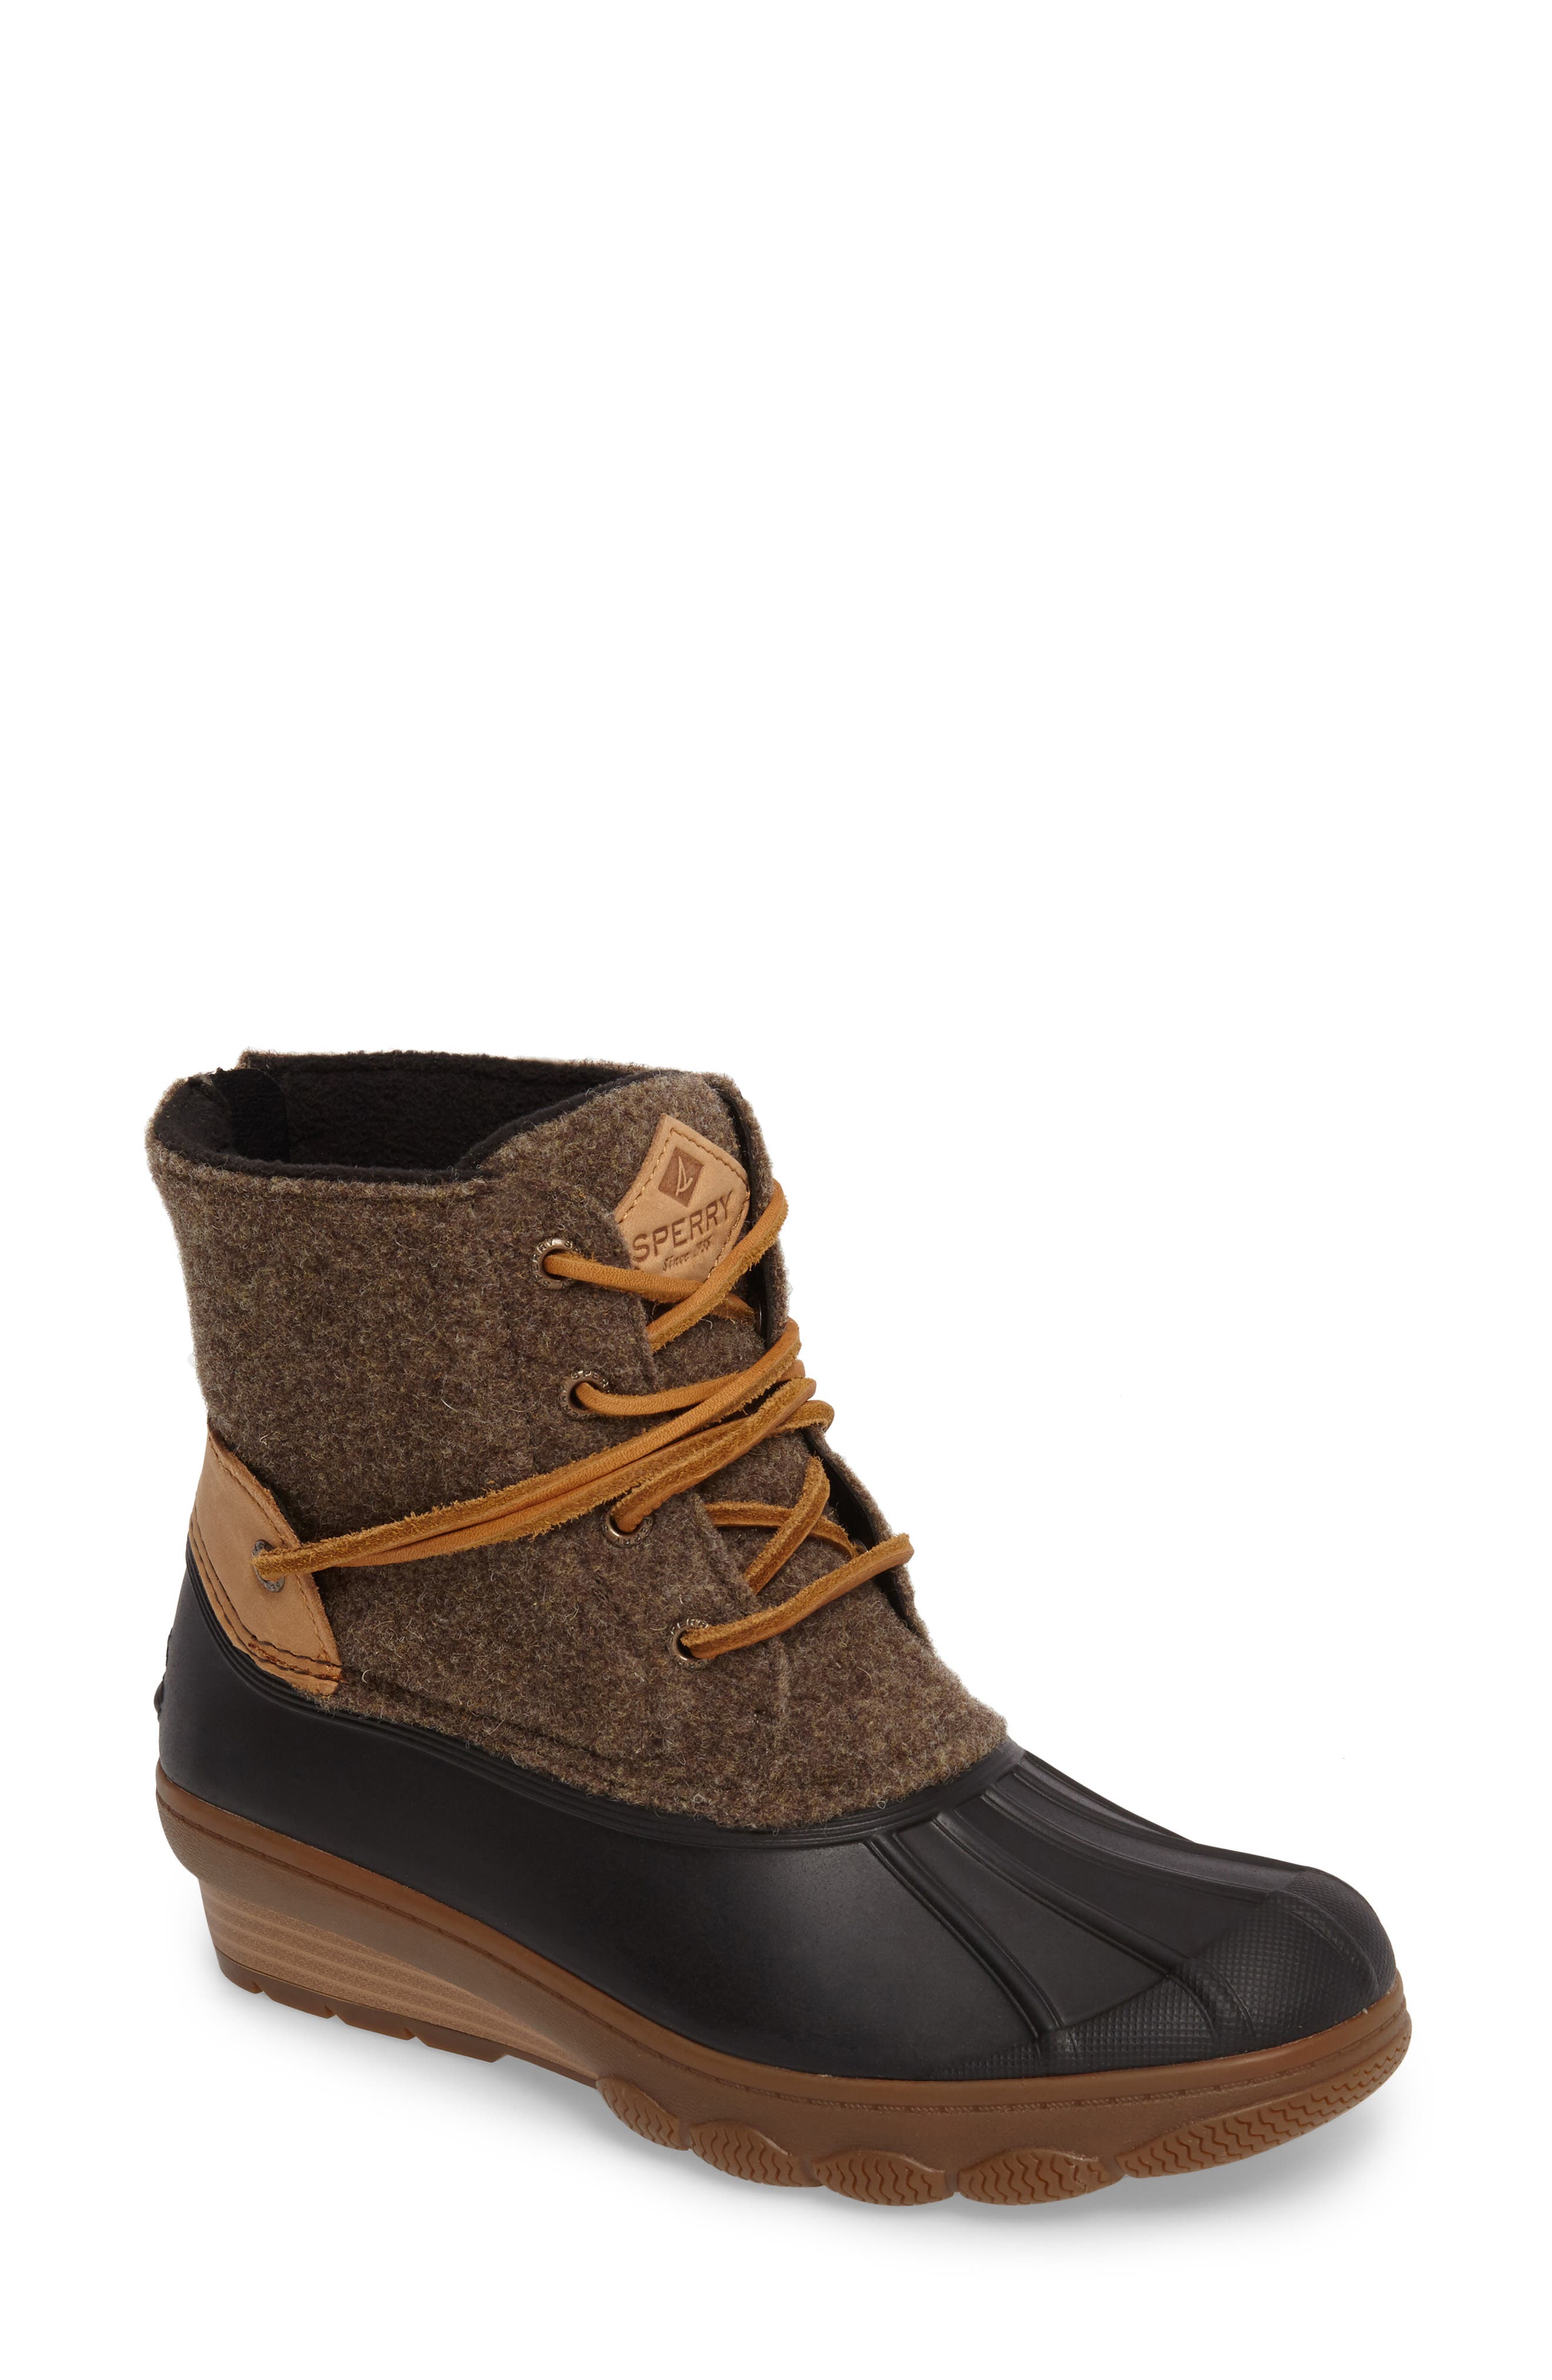 sperry wedge boots